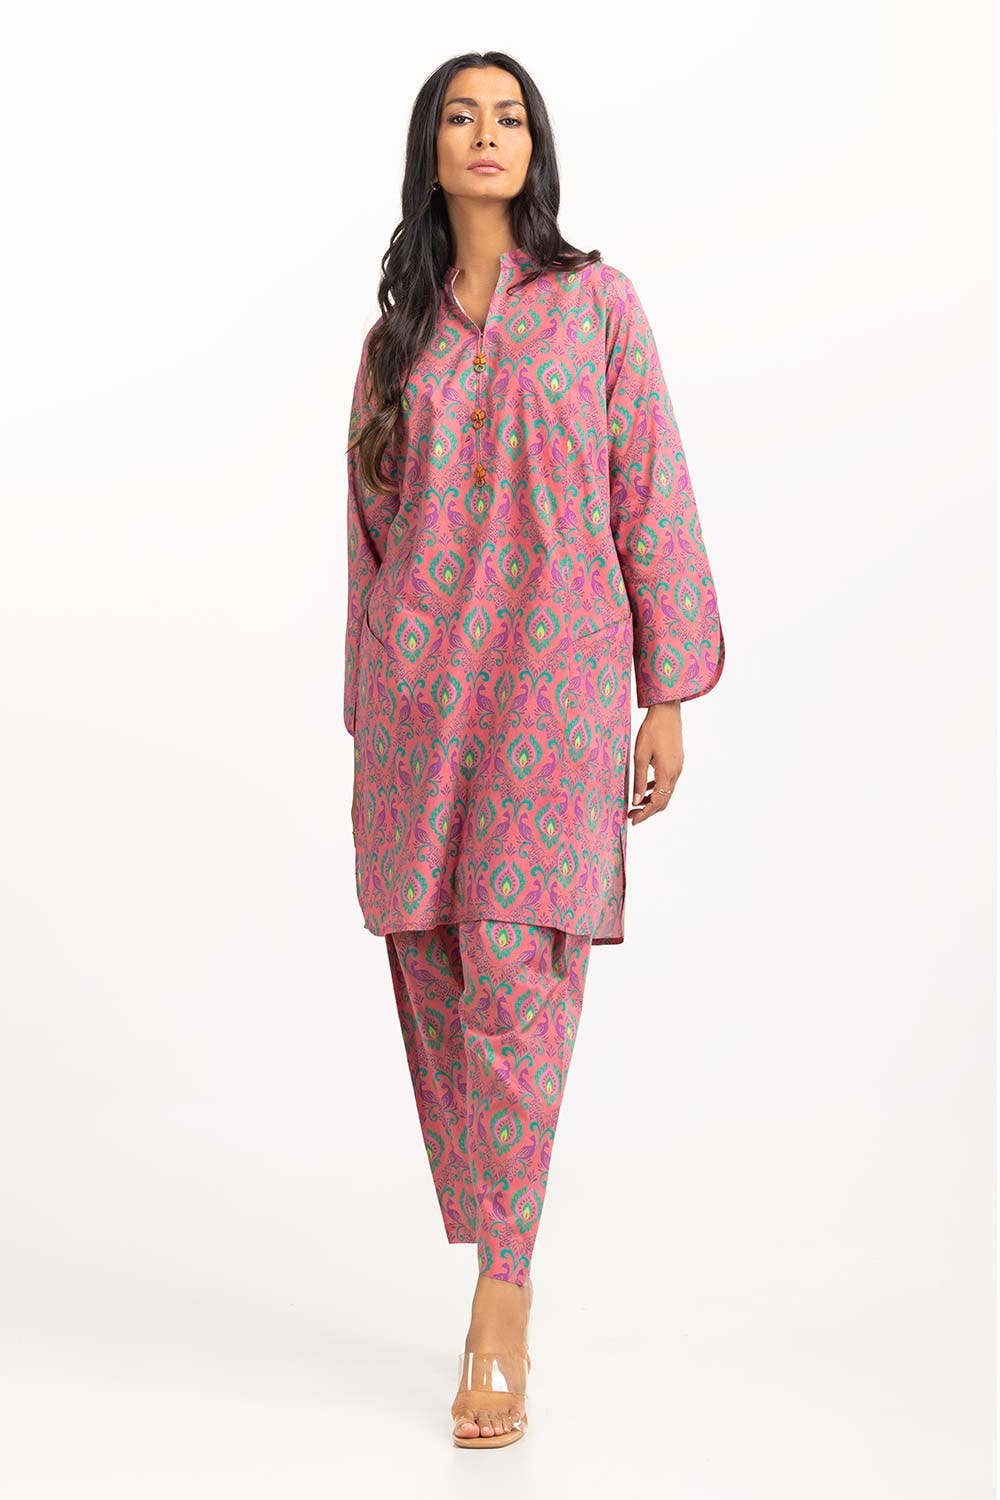 Gul Ahmed 02 Piece Stitched Digital Printed Cambric Embellished Shirt With Trouser IPS-23-120